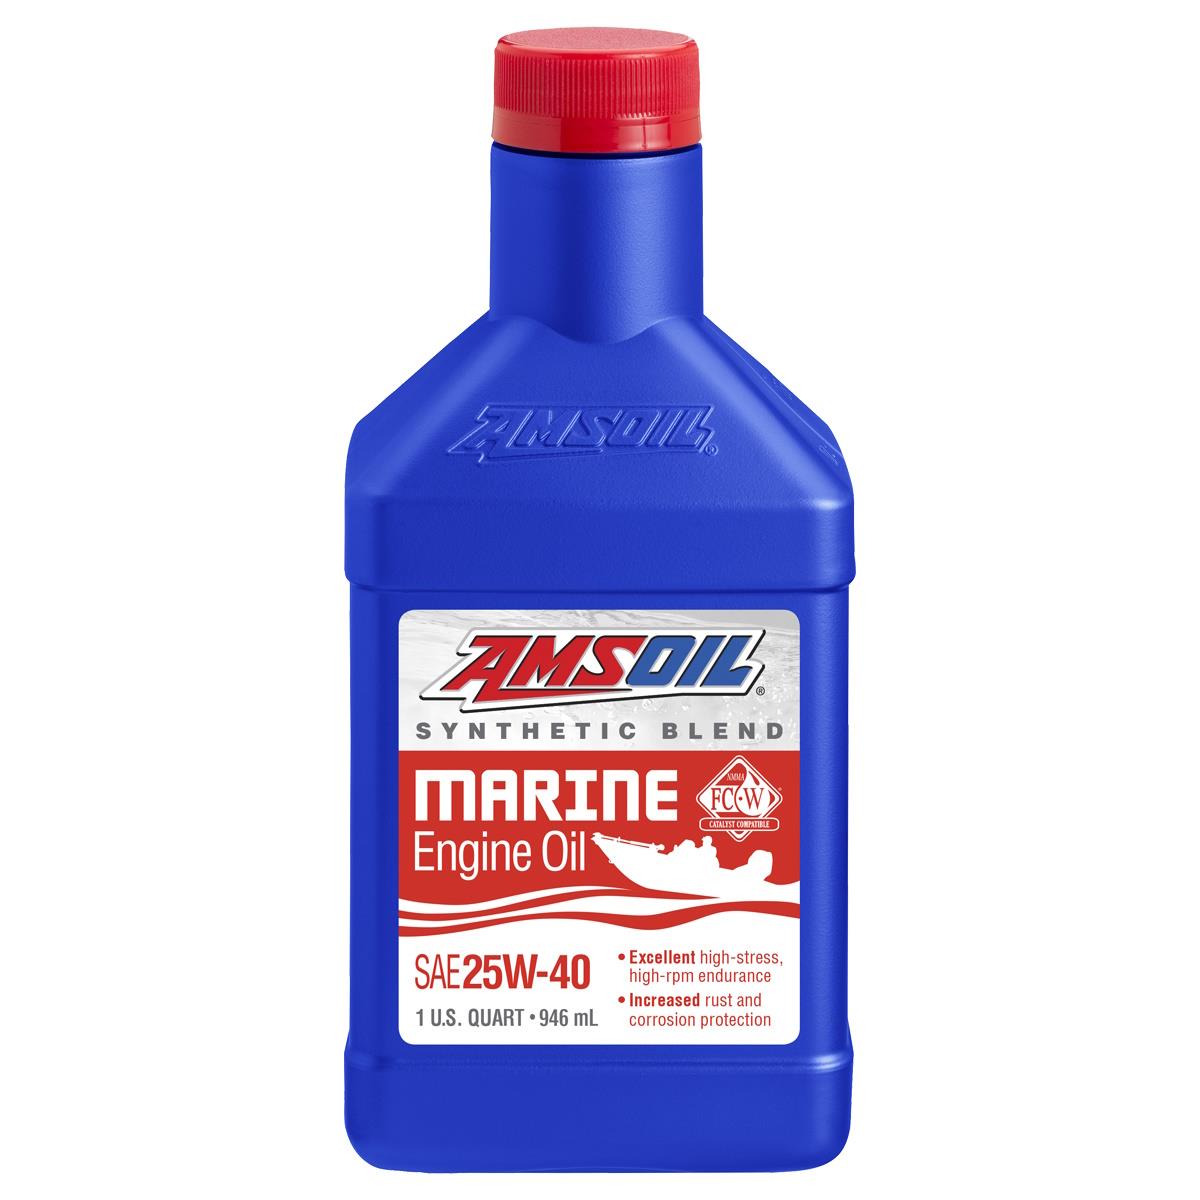 AMSOIL 20W40 Synthetic-Blend Marine Engine Oil